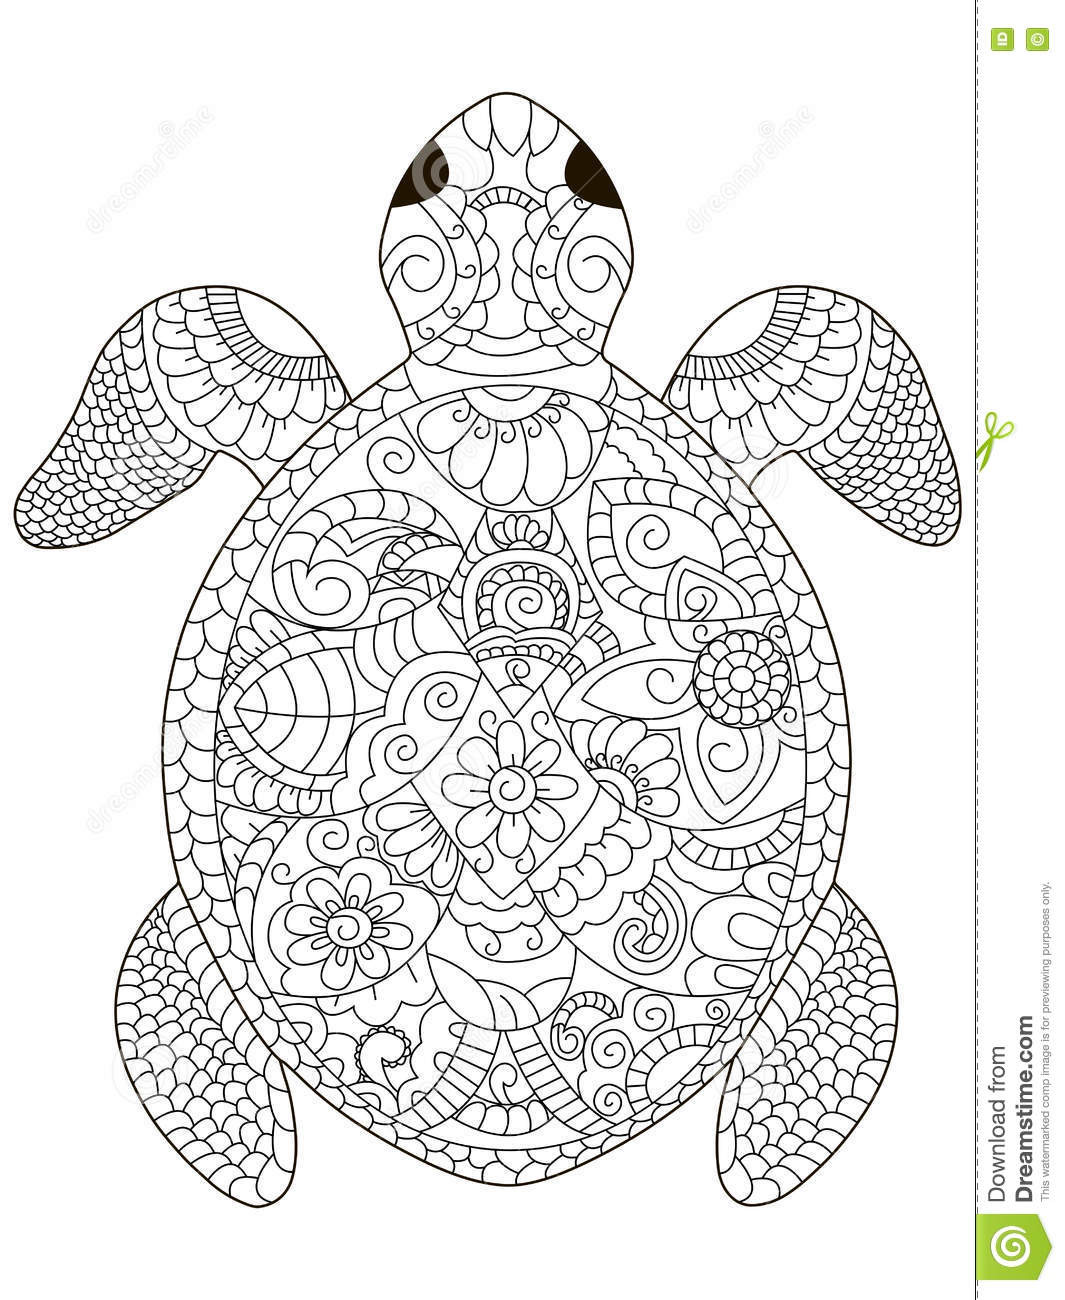 Adult Coloring Pages Turtle
 Sea Turtle Coloring Vector For Adults Stock Vector